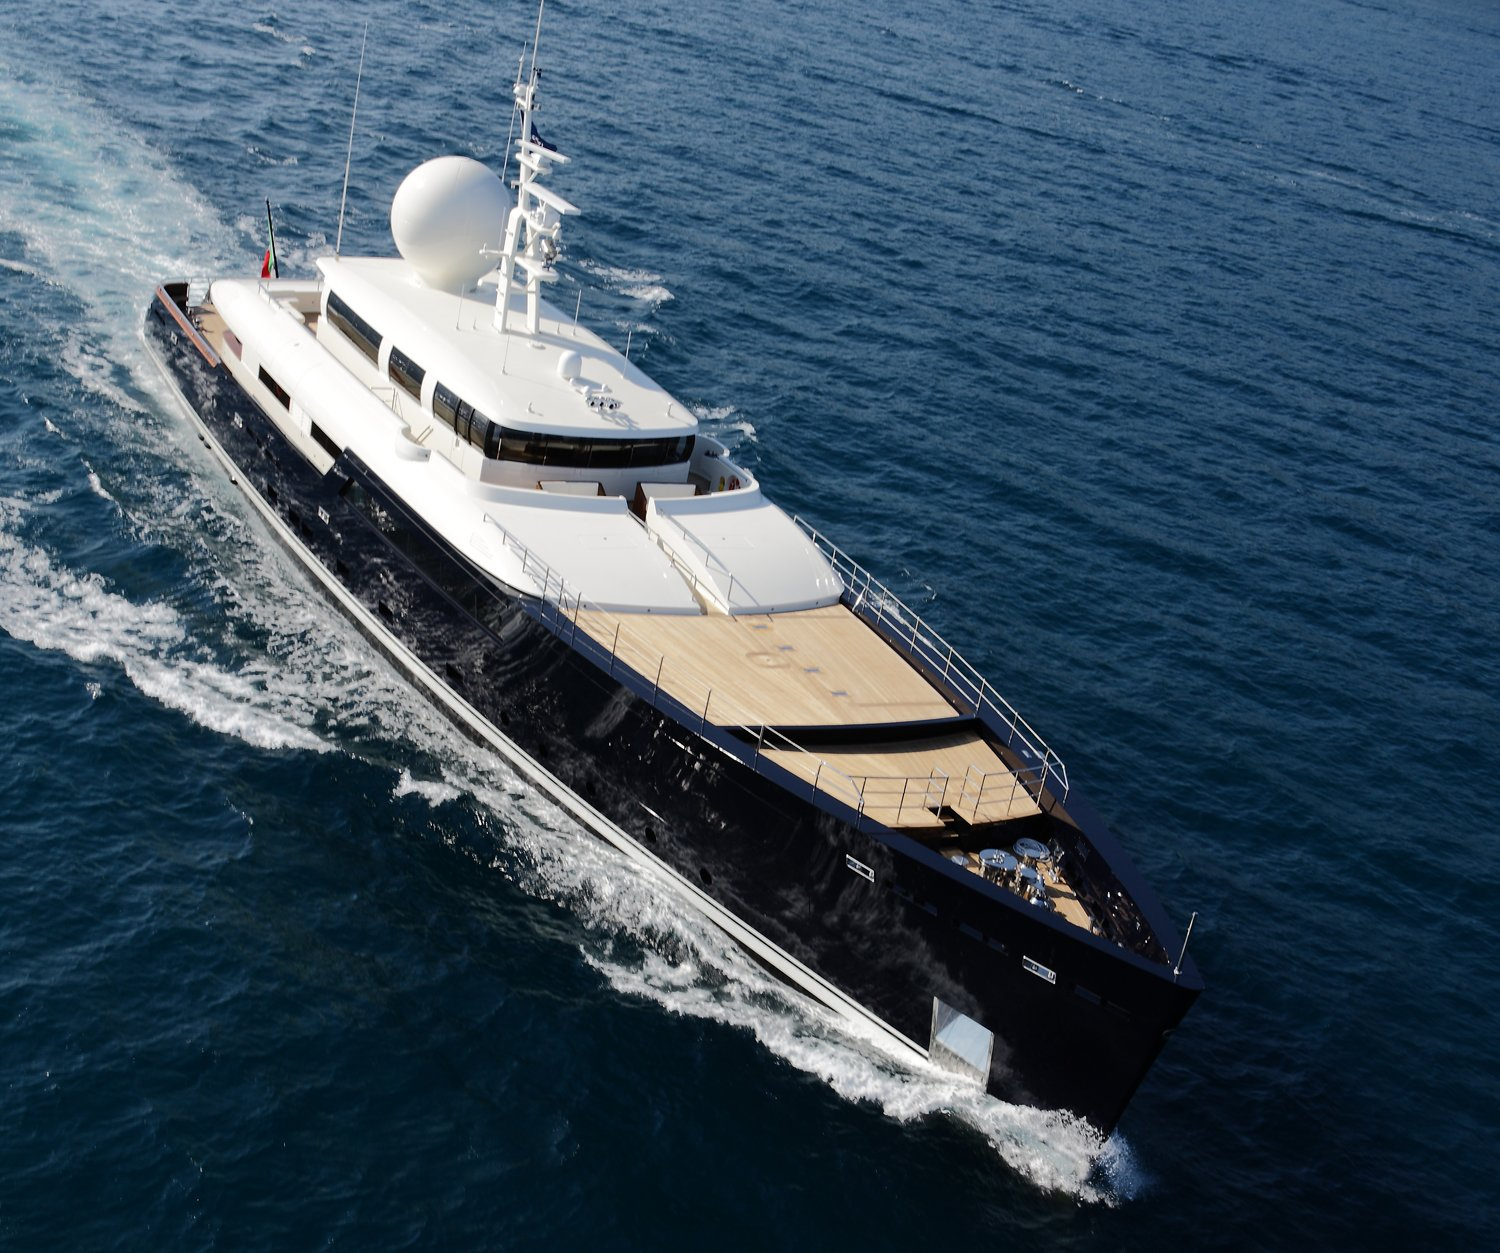 6170-picchiotti-launch-superyacht-galileo-g-for-the-2011-mys.jpg